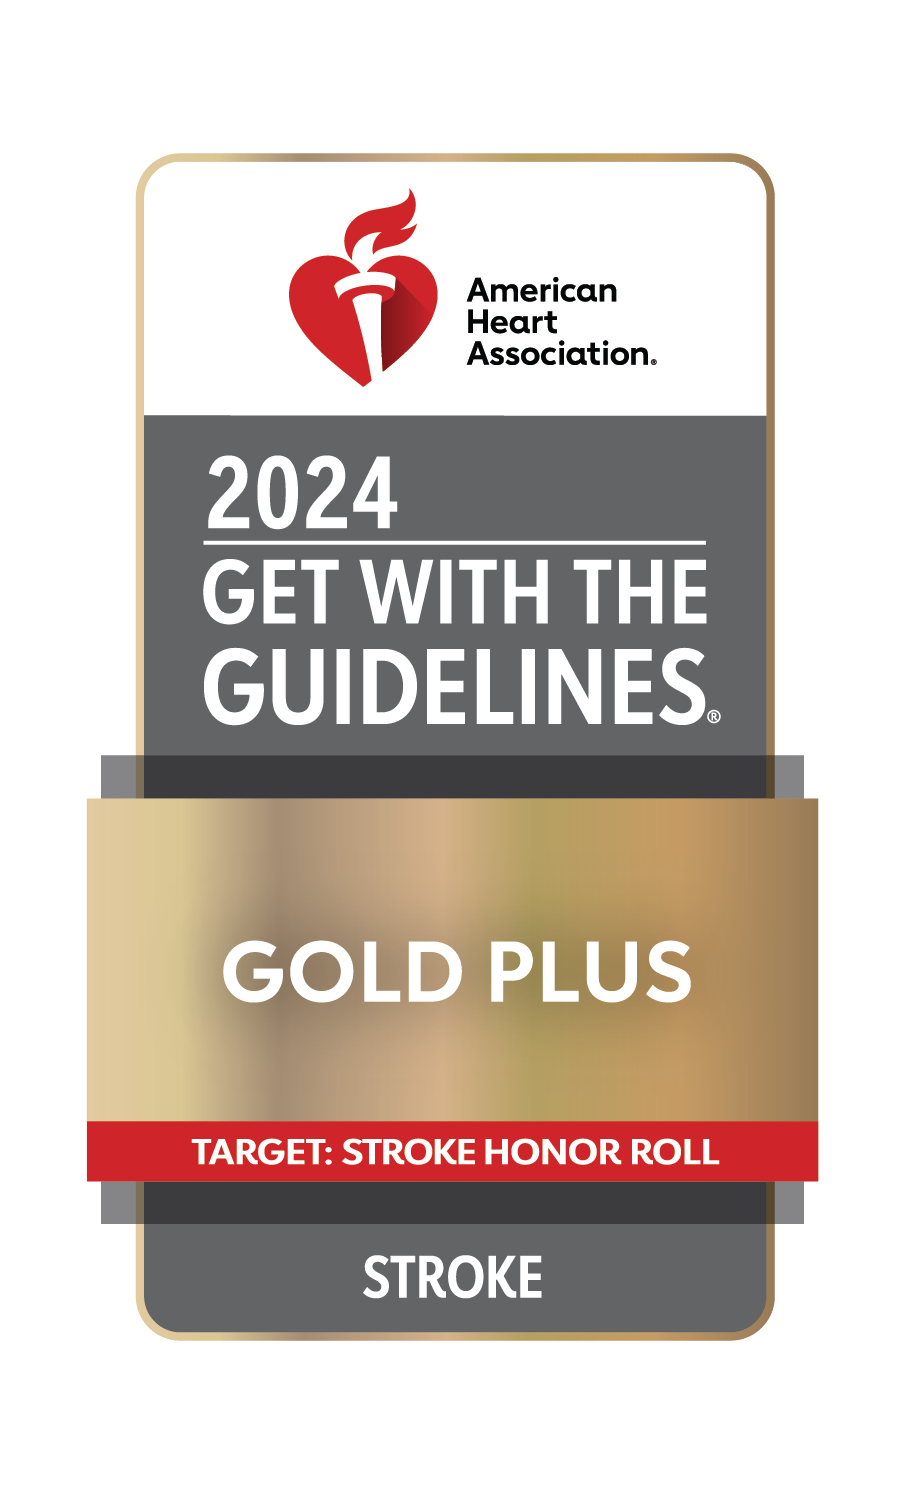 Get With the Guidelines Gold Plus Stroke